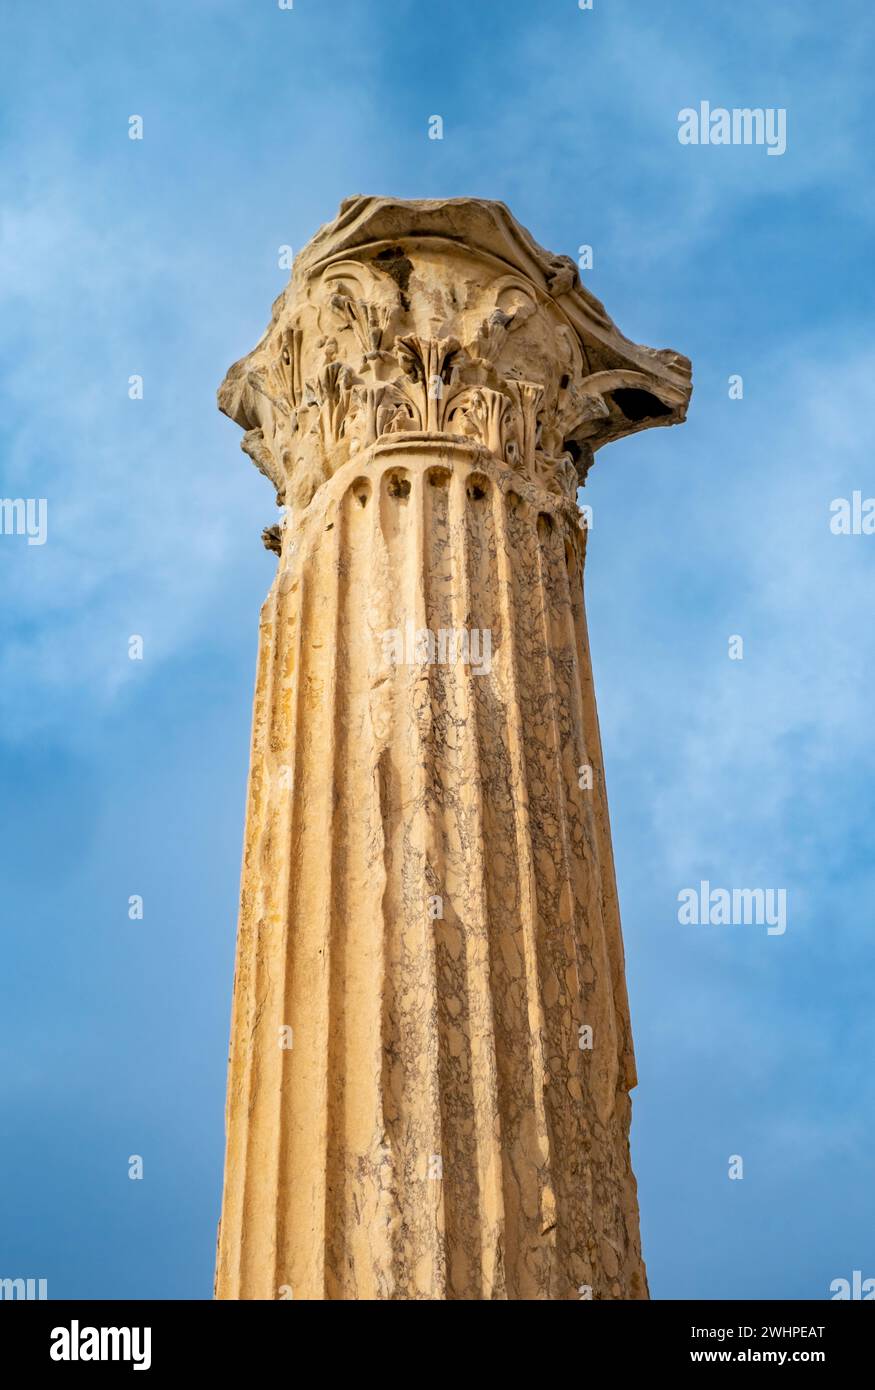 Column of Hadrian's Library against the sky, Athens, Greece Stock Photo